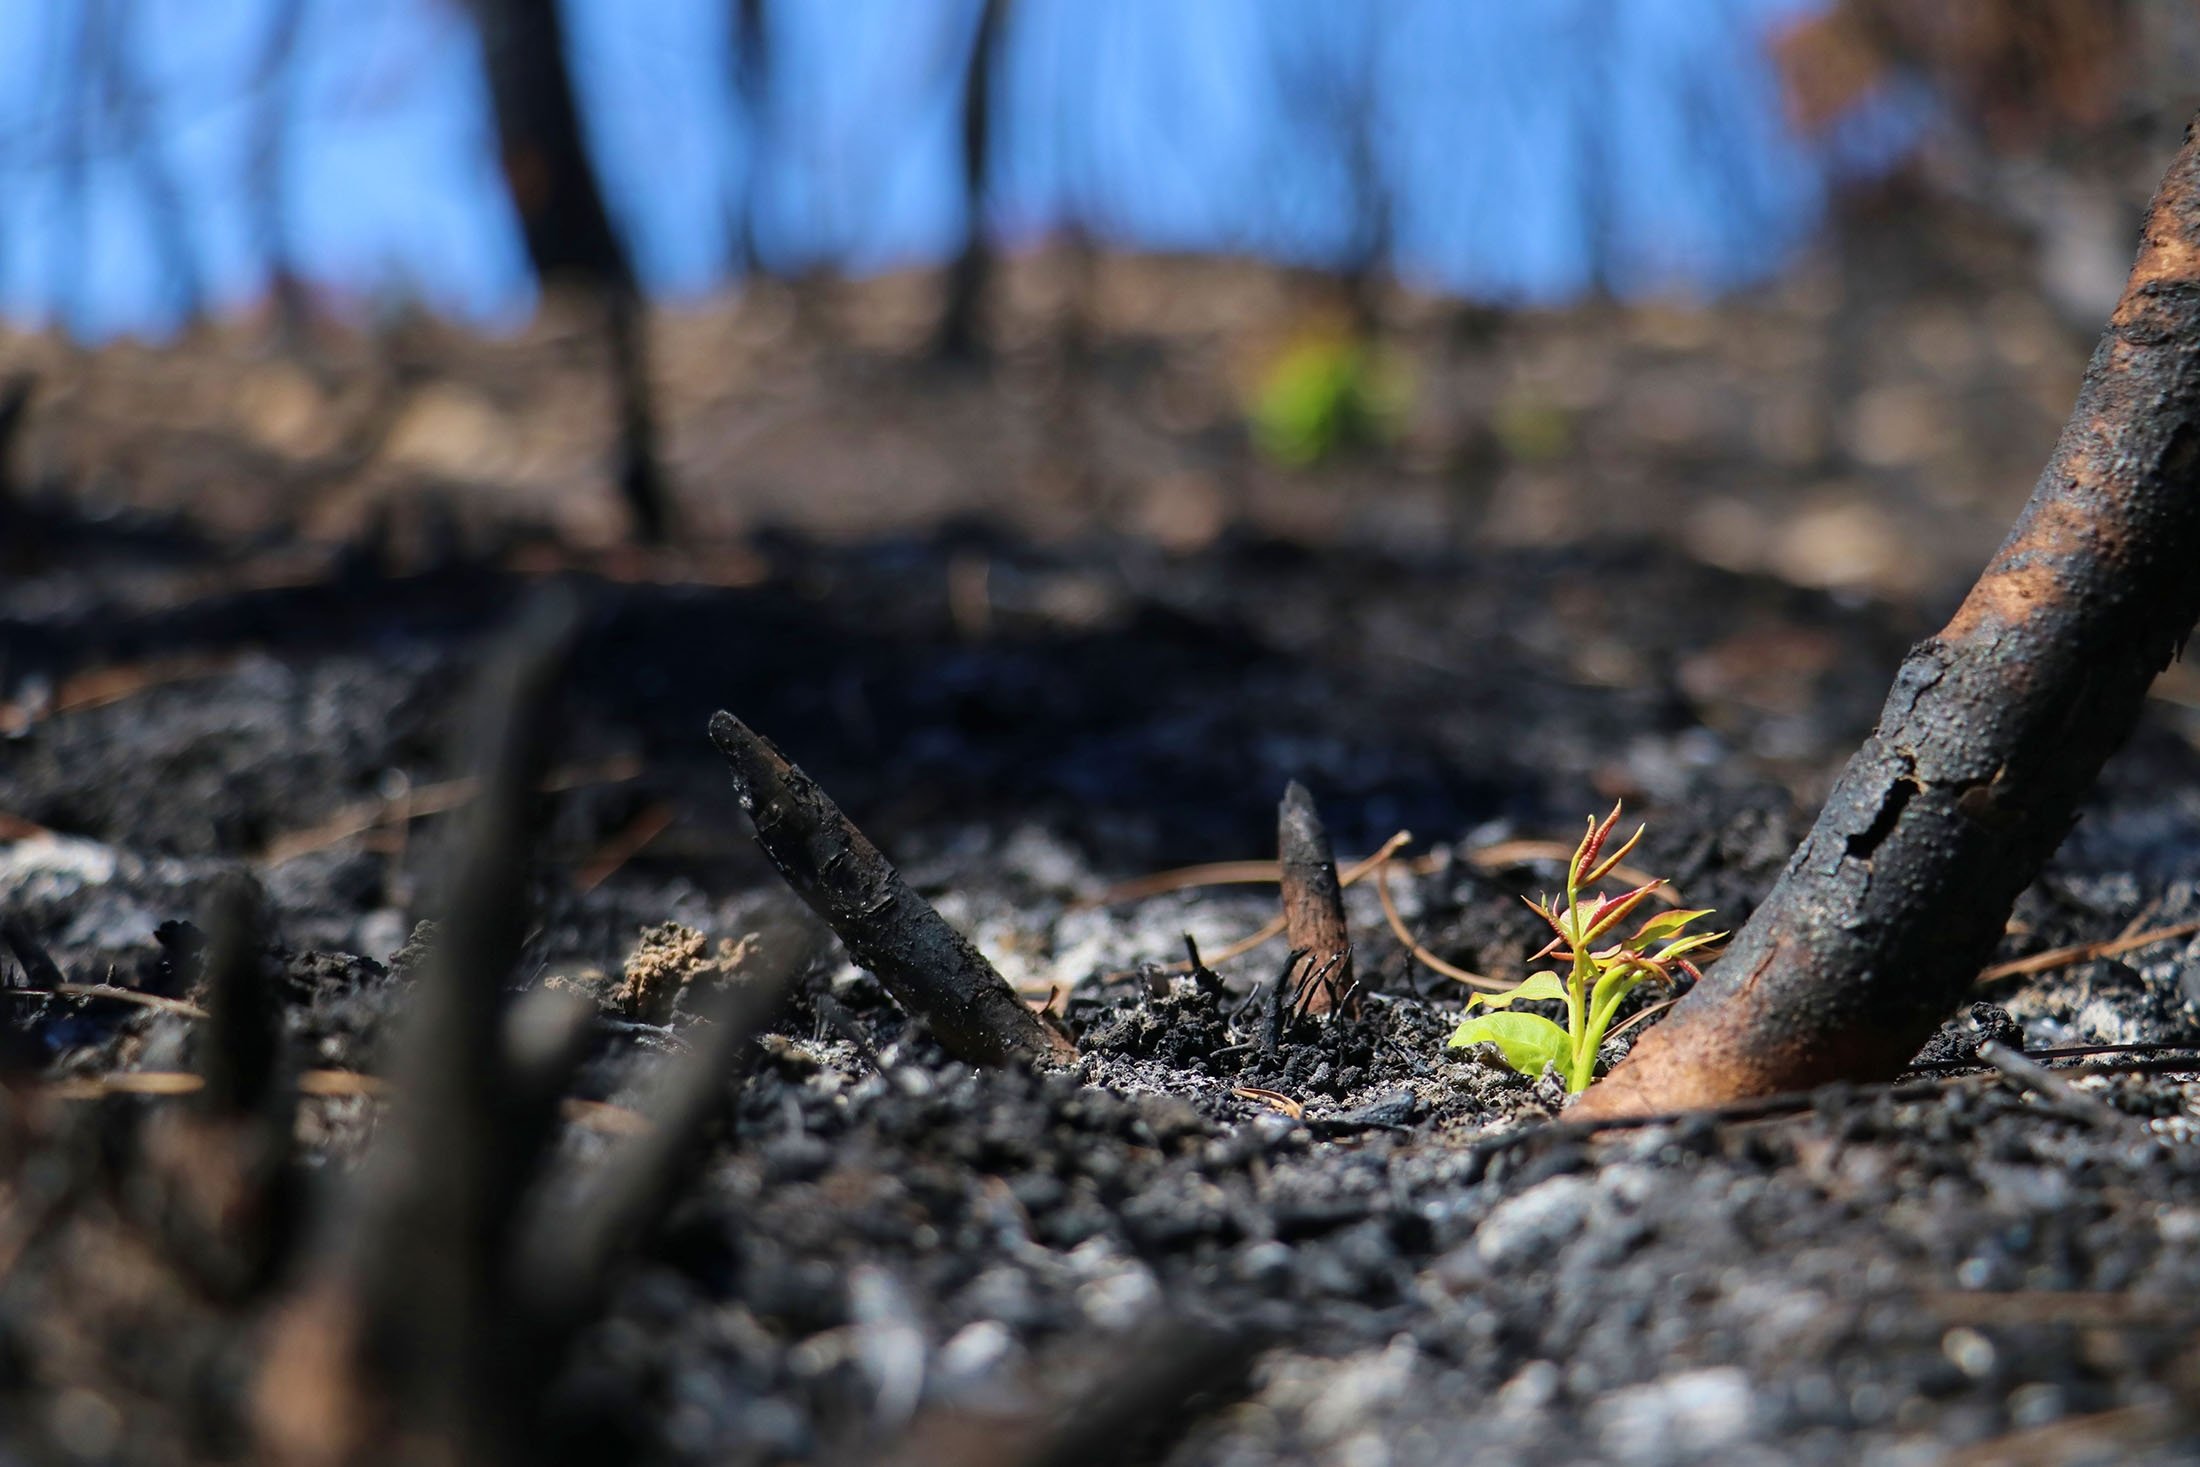 Small saplings sprout green new leaves in a burnt forest area, in Adana, Turkey, Oct. 19, 2021. (AA Photo)